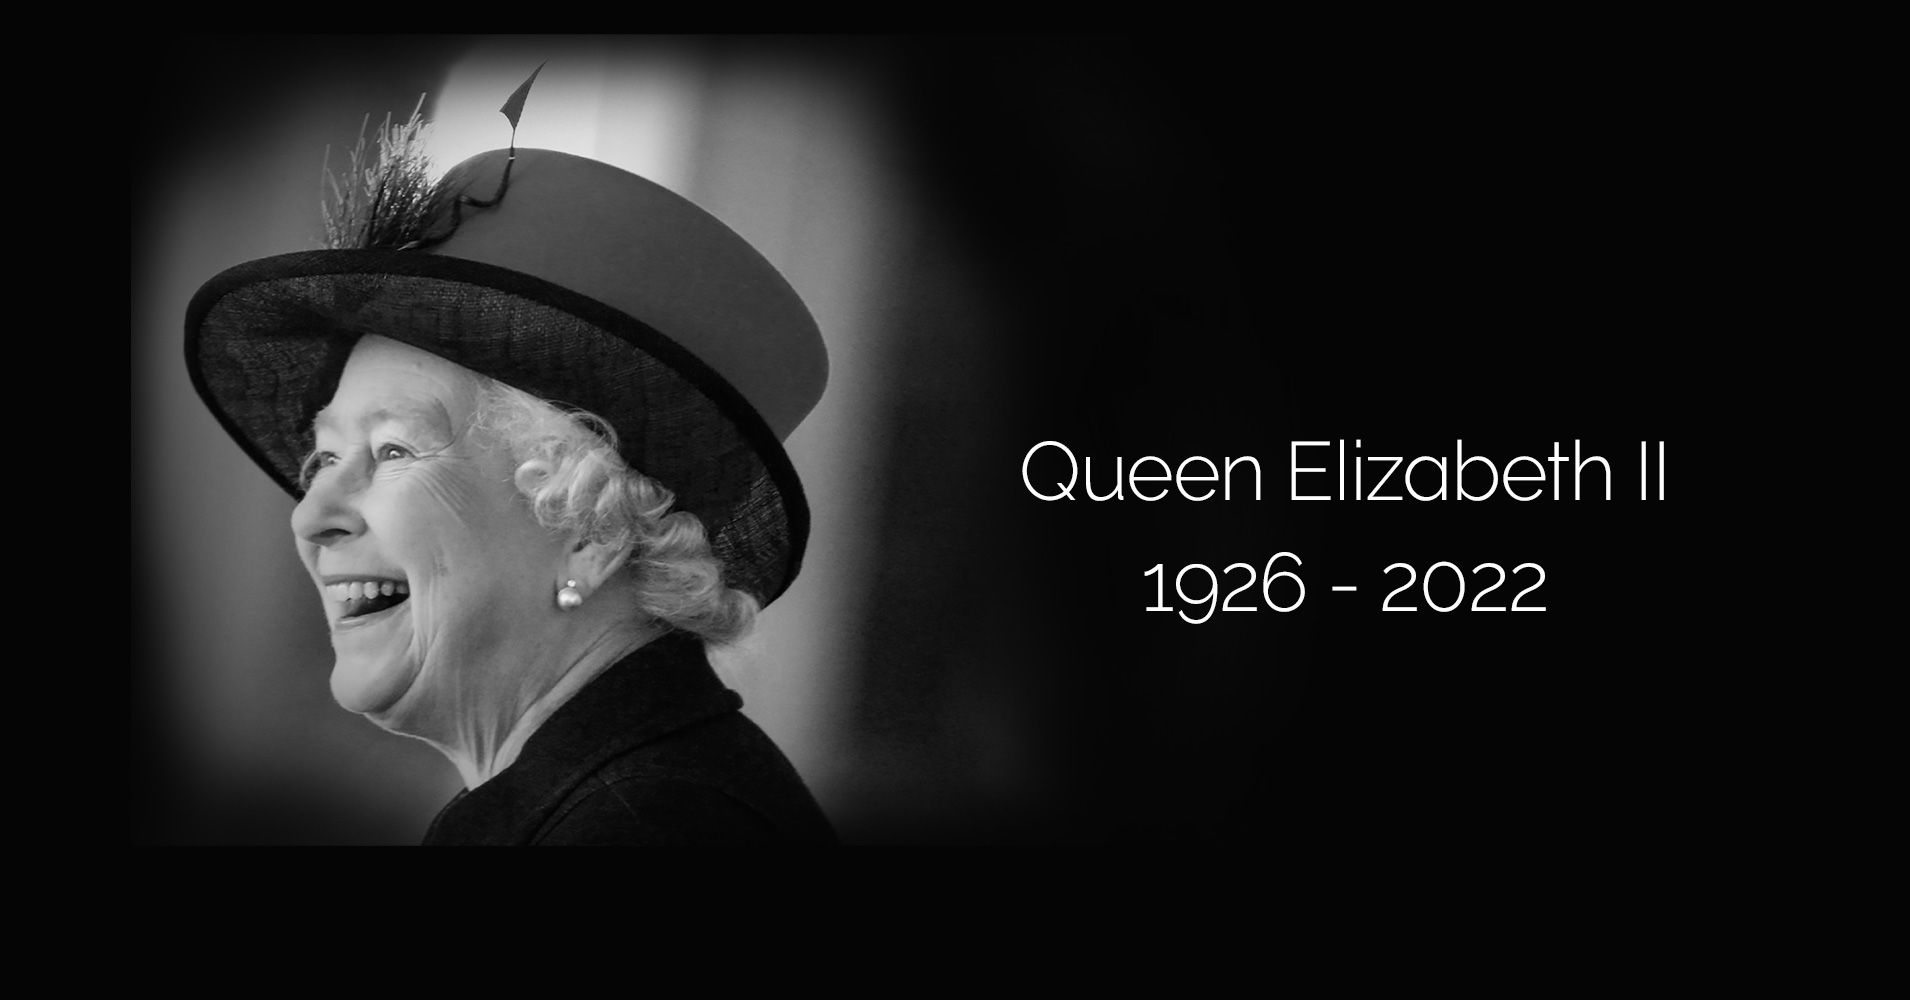 A black and white portrait of Her Majesty Queen Elizabeth II